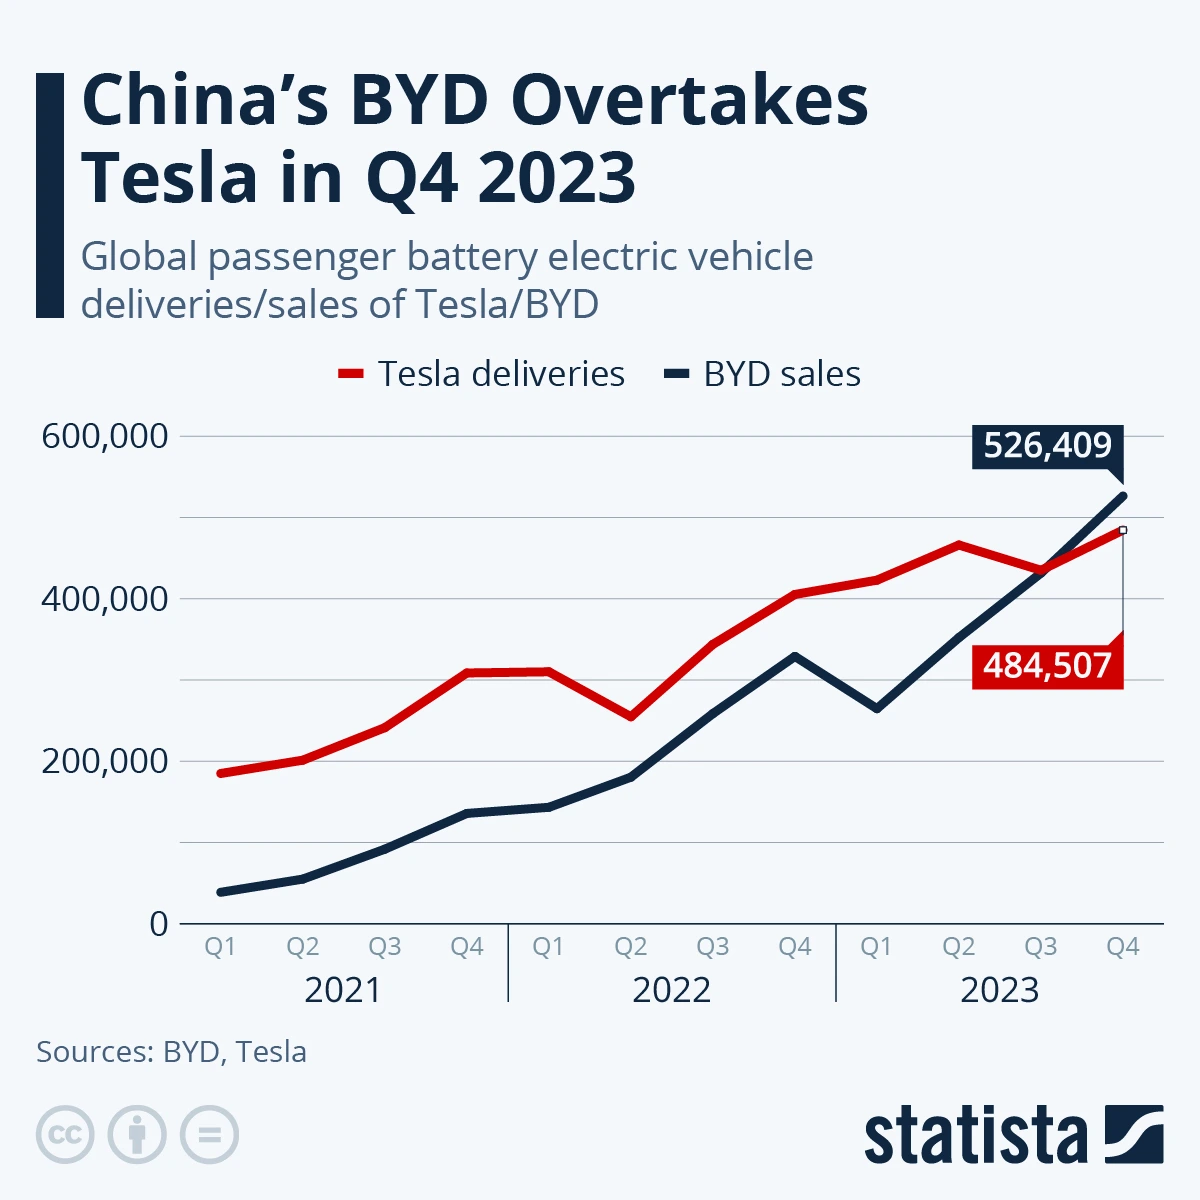 A comparative graph illustrating the sales trends of Tesla and BYD electric vehicles over time, showcasing the market dynamics between these two prominent EV manufacturers.